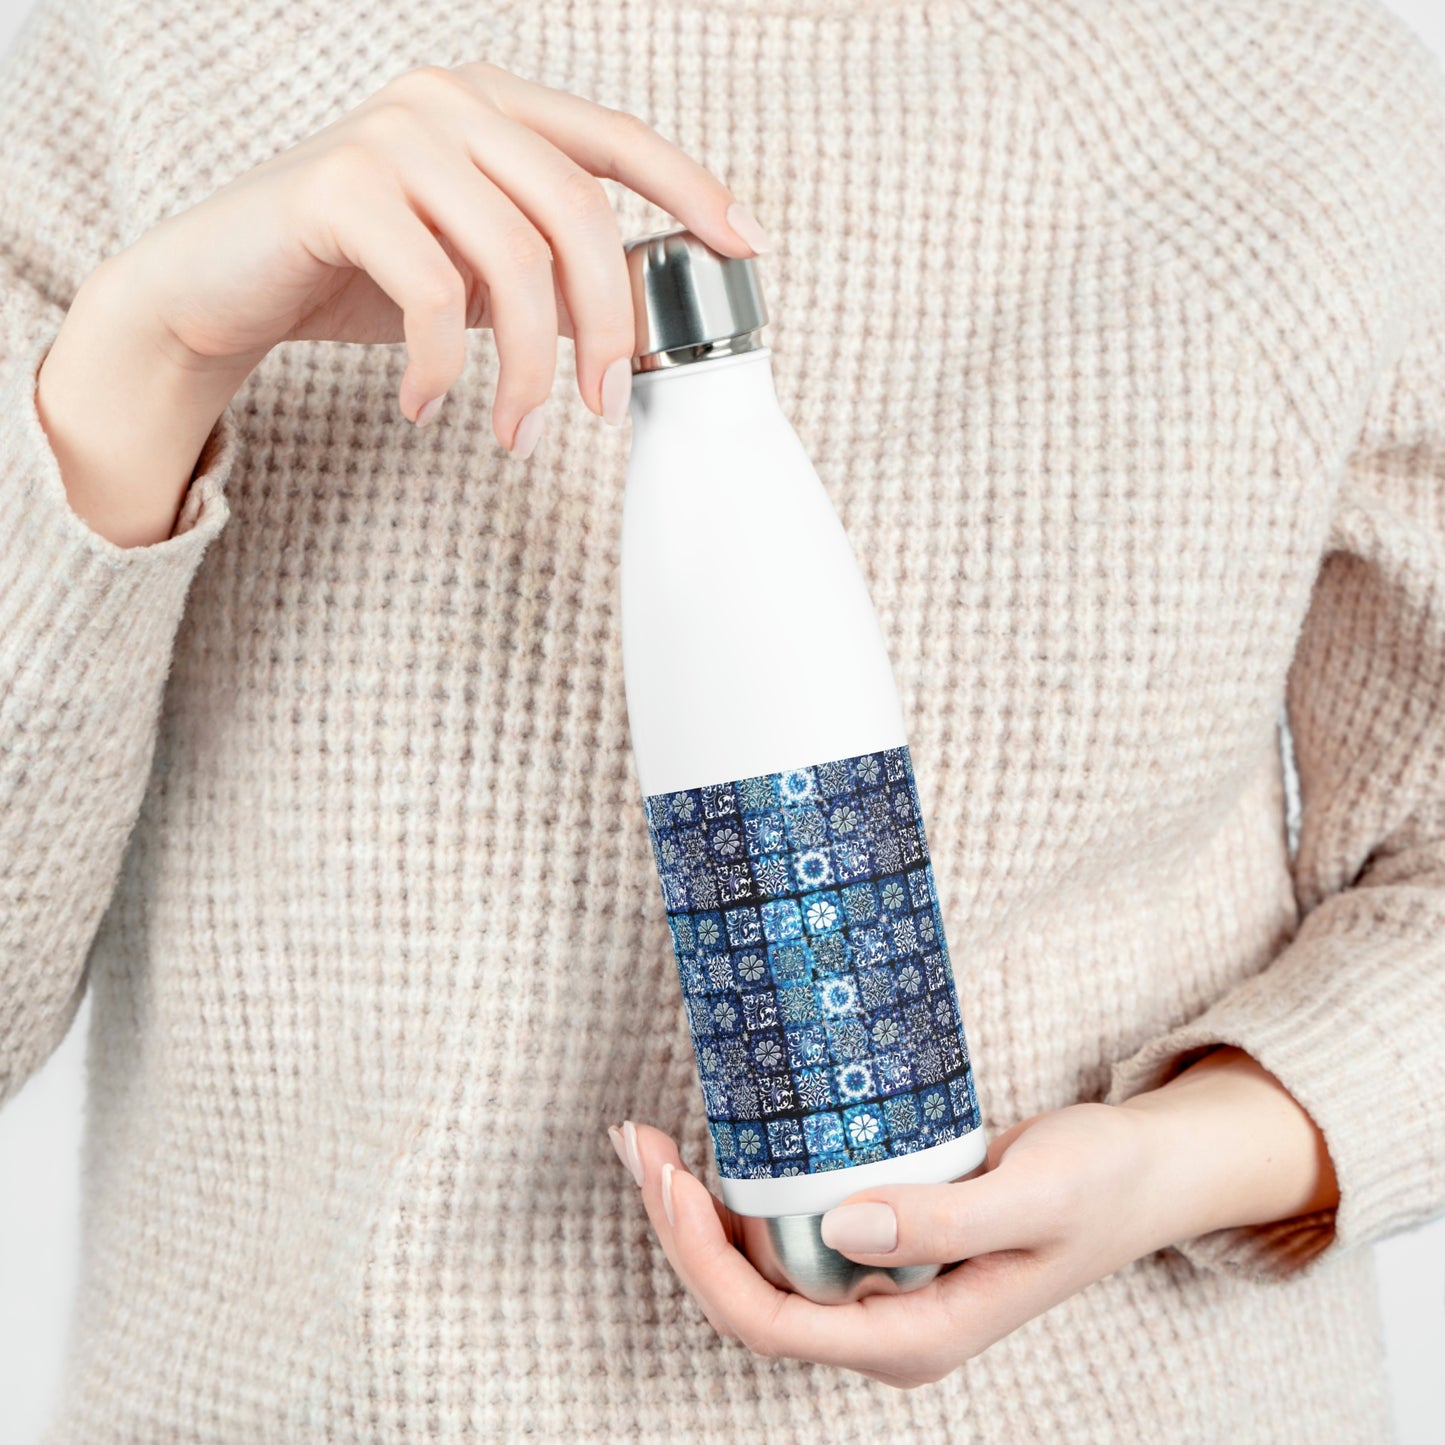 Blue Ice Crystals Motif 20oz Insulated Bottle